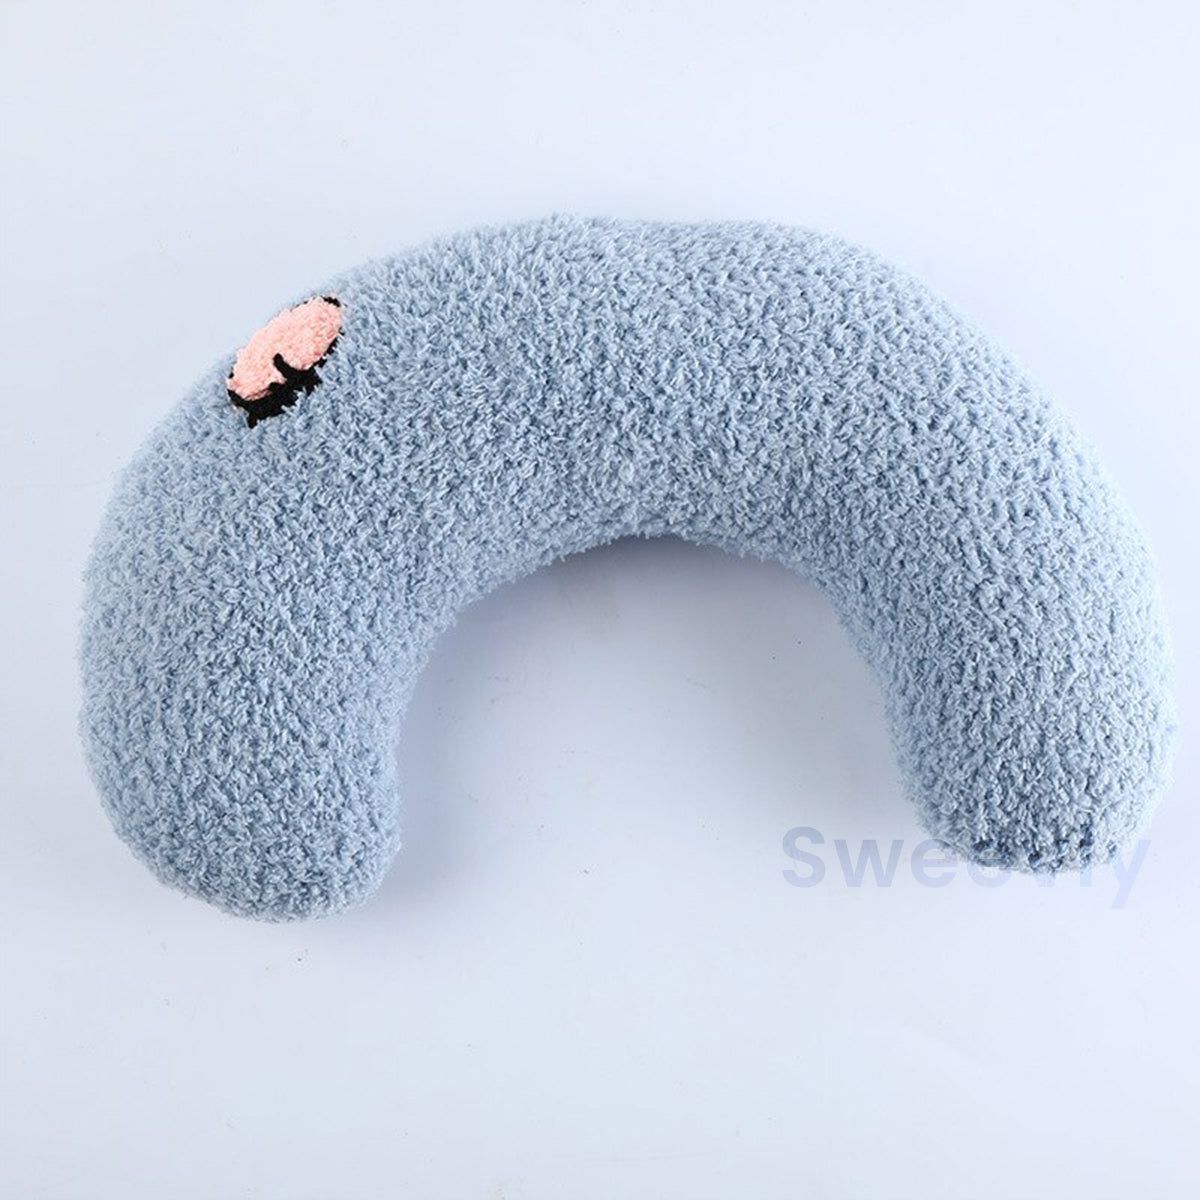 Sweevly - Anti-Anxiety Calming Pillow